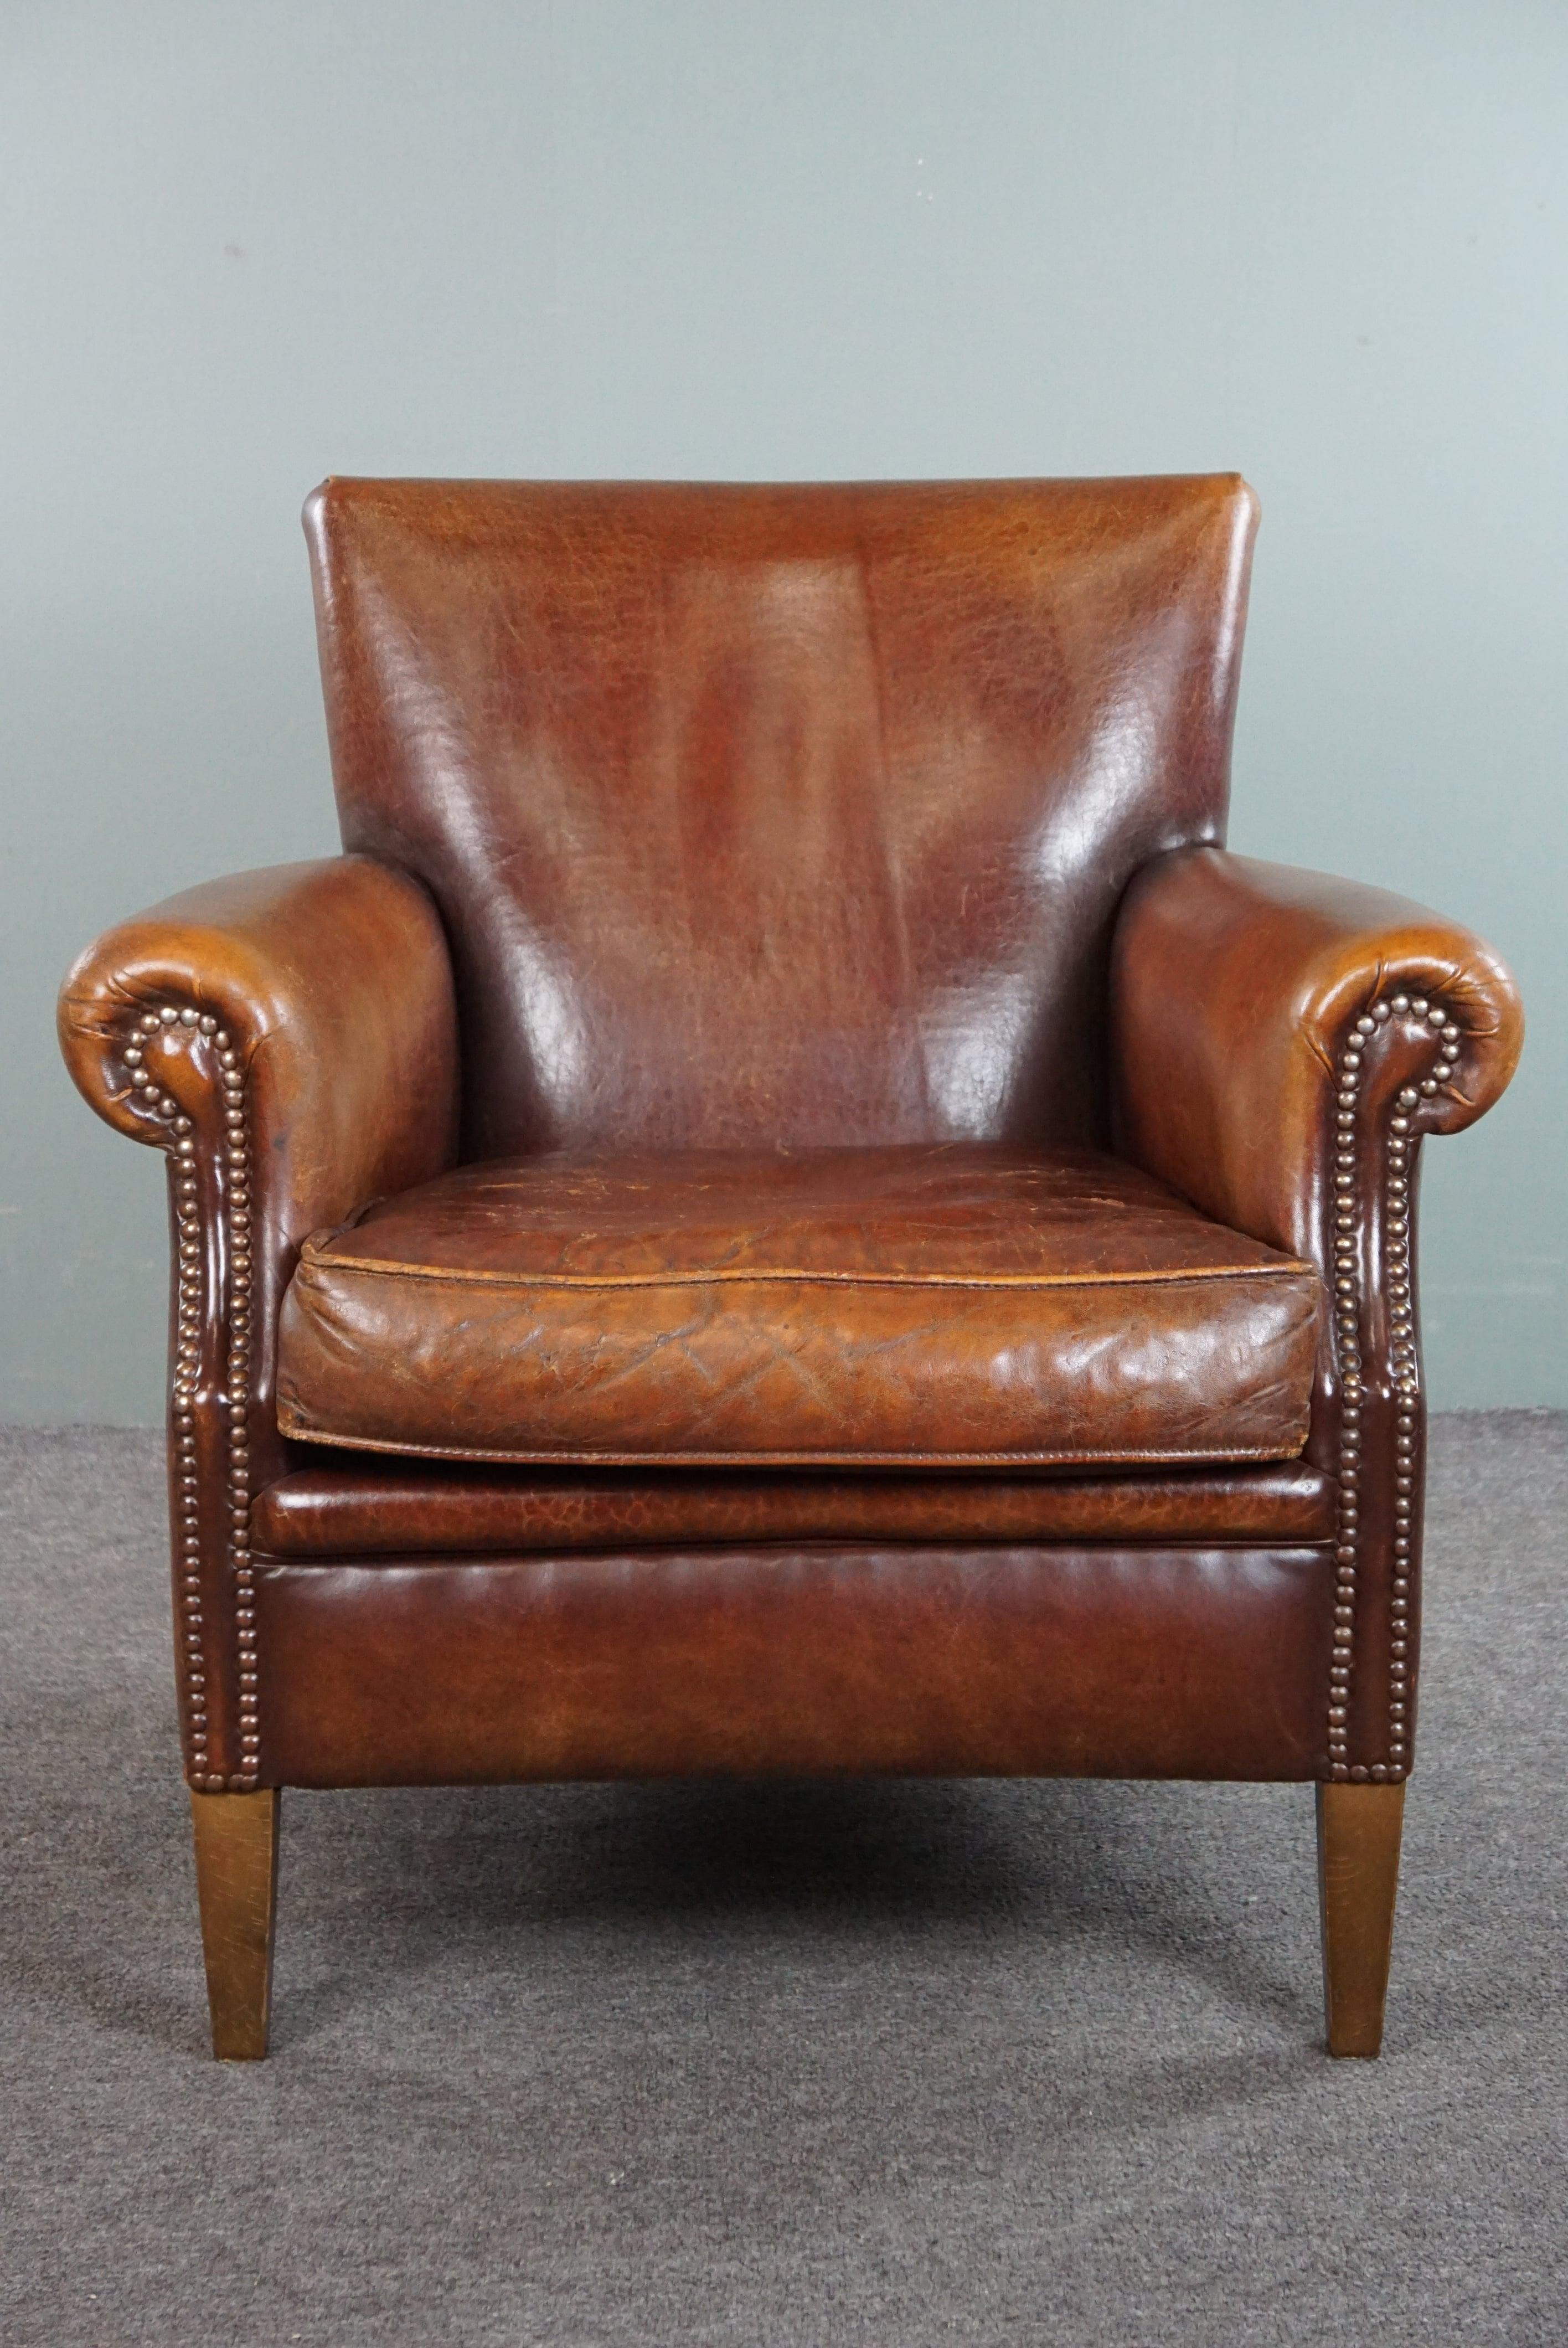 Offered is this sheepskin armchair with a wonderful patina and a correct worn look. 

We proudly offer this sheepskin armchair for sale because we believe it is a beautiful example of how a vintage sheepskin armchair should be. It also has a nice